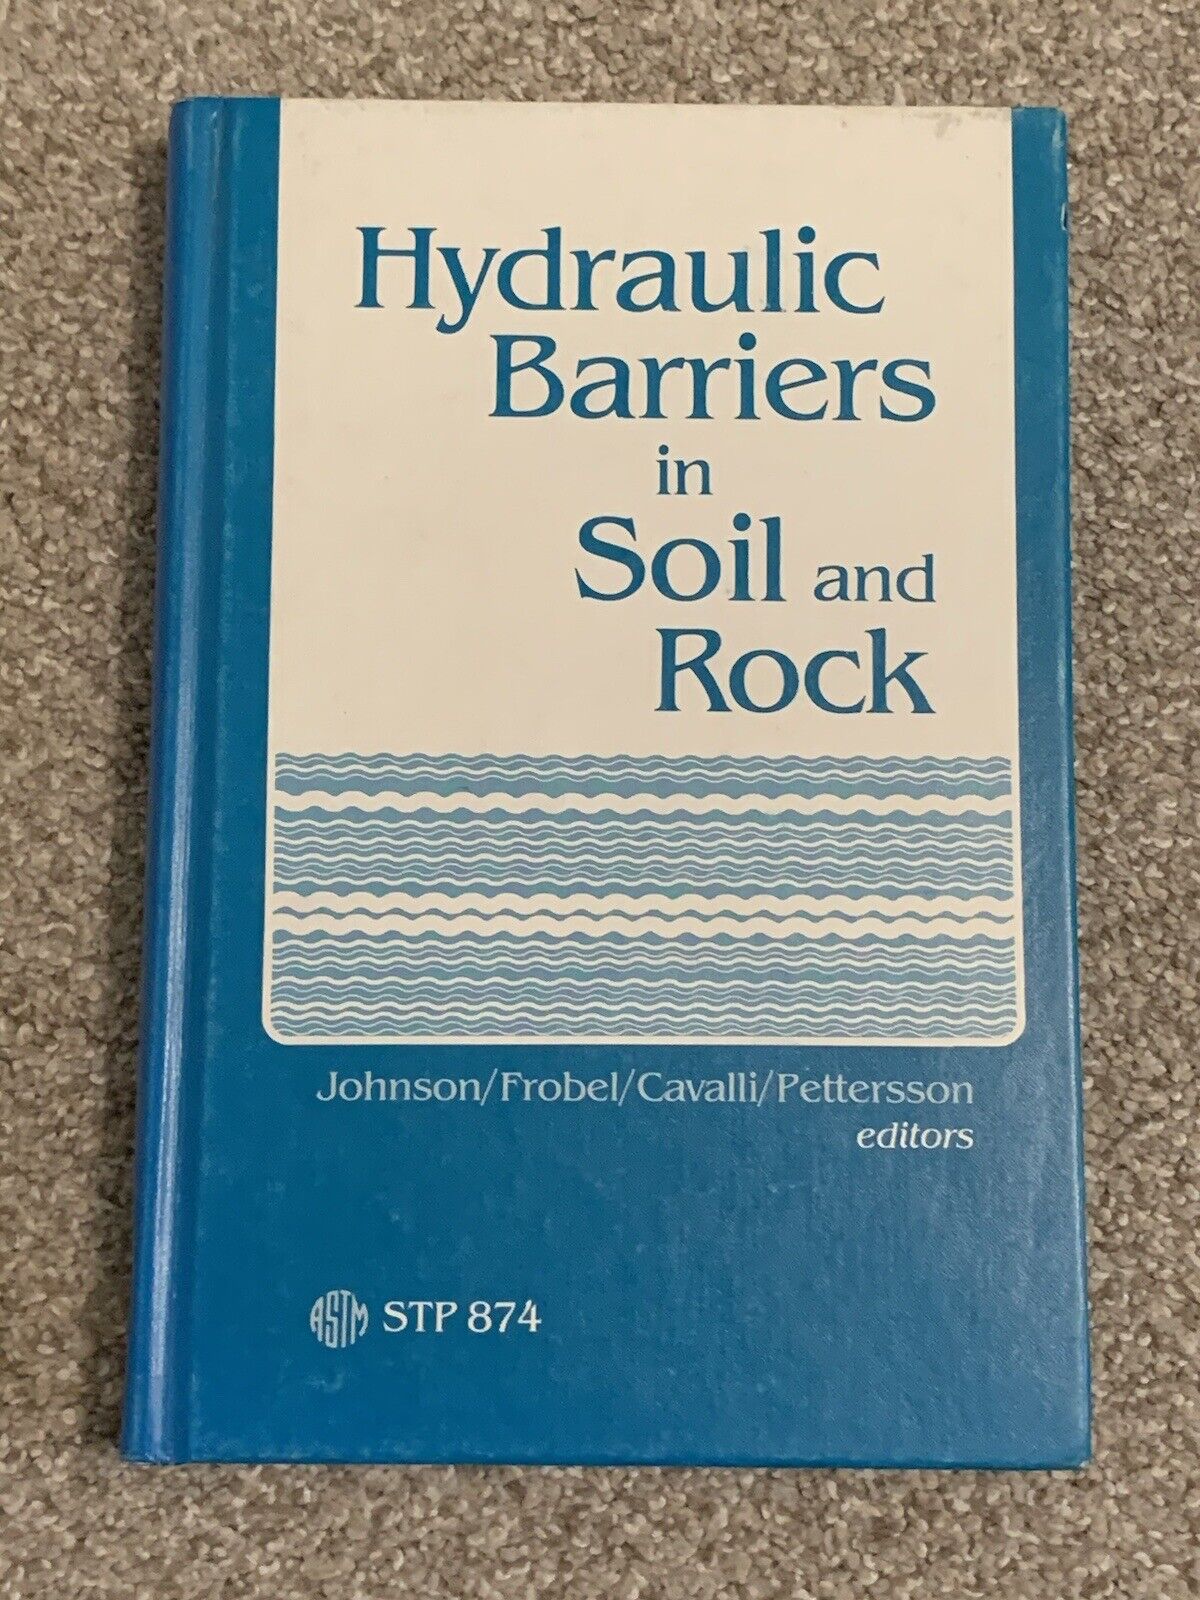 Hydraulic Barriers in Soil and Rock